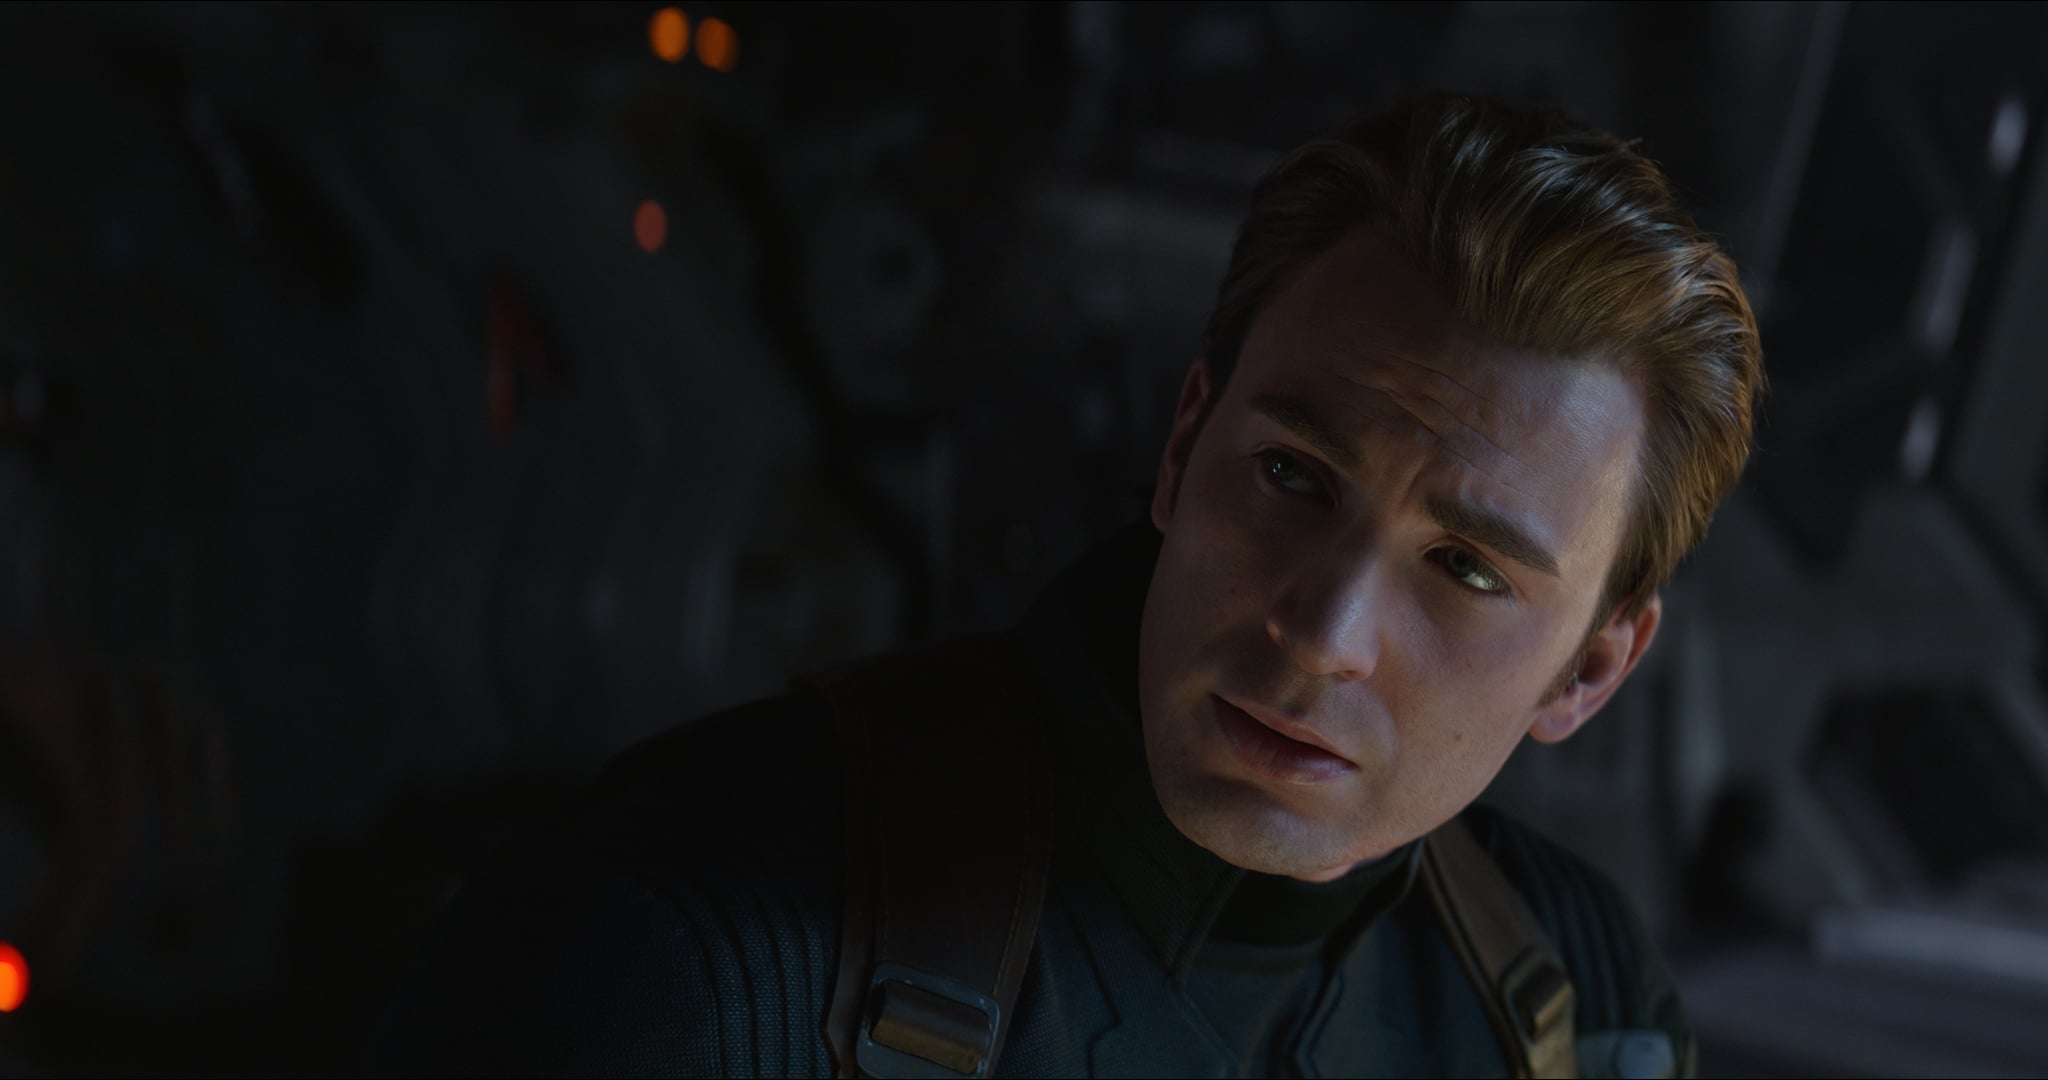 Endgame Writers reveal the existence of two Captain Americas in the MCU since 1945